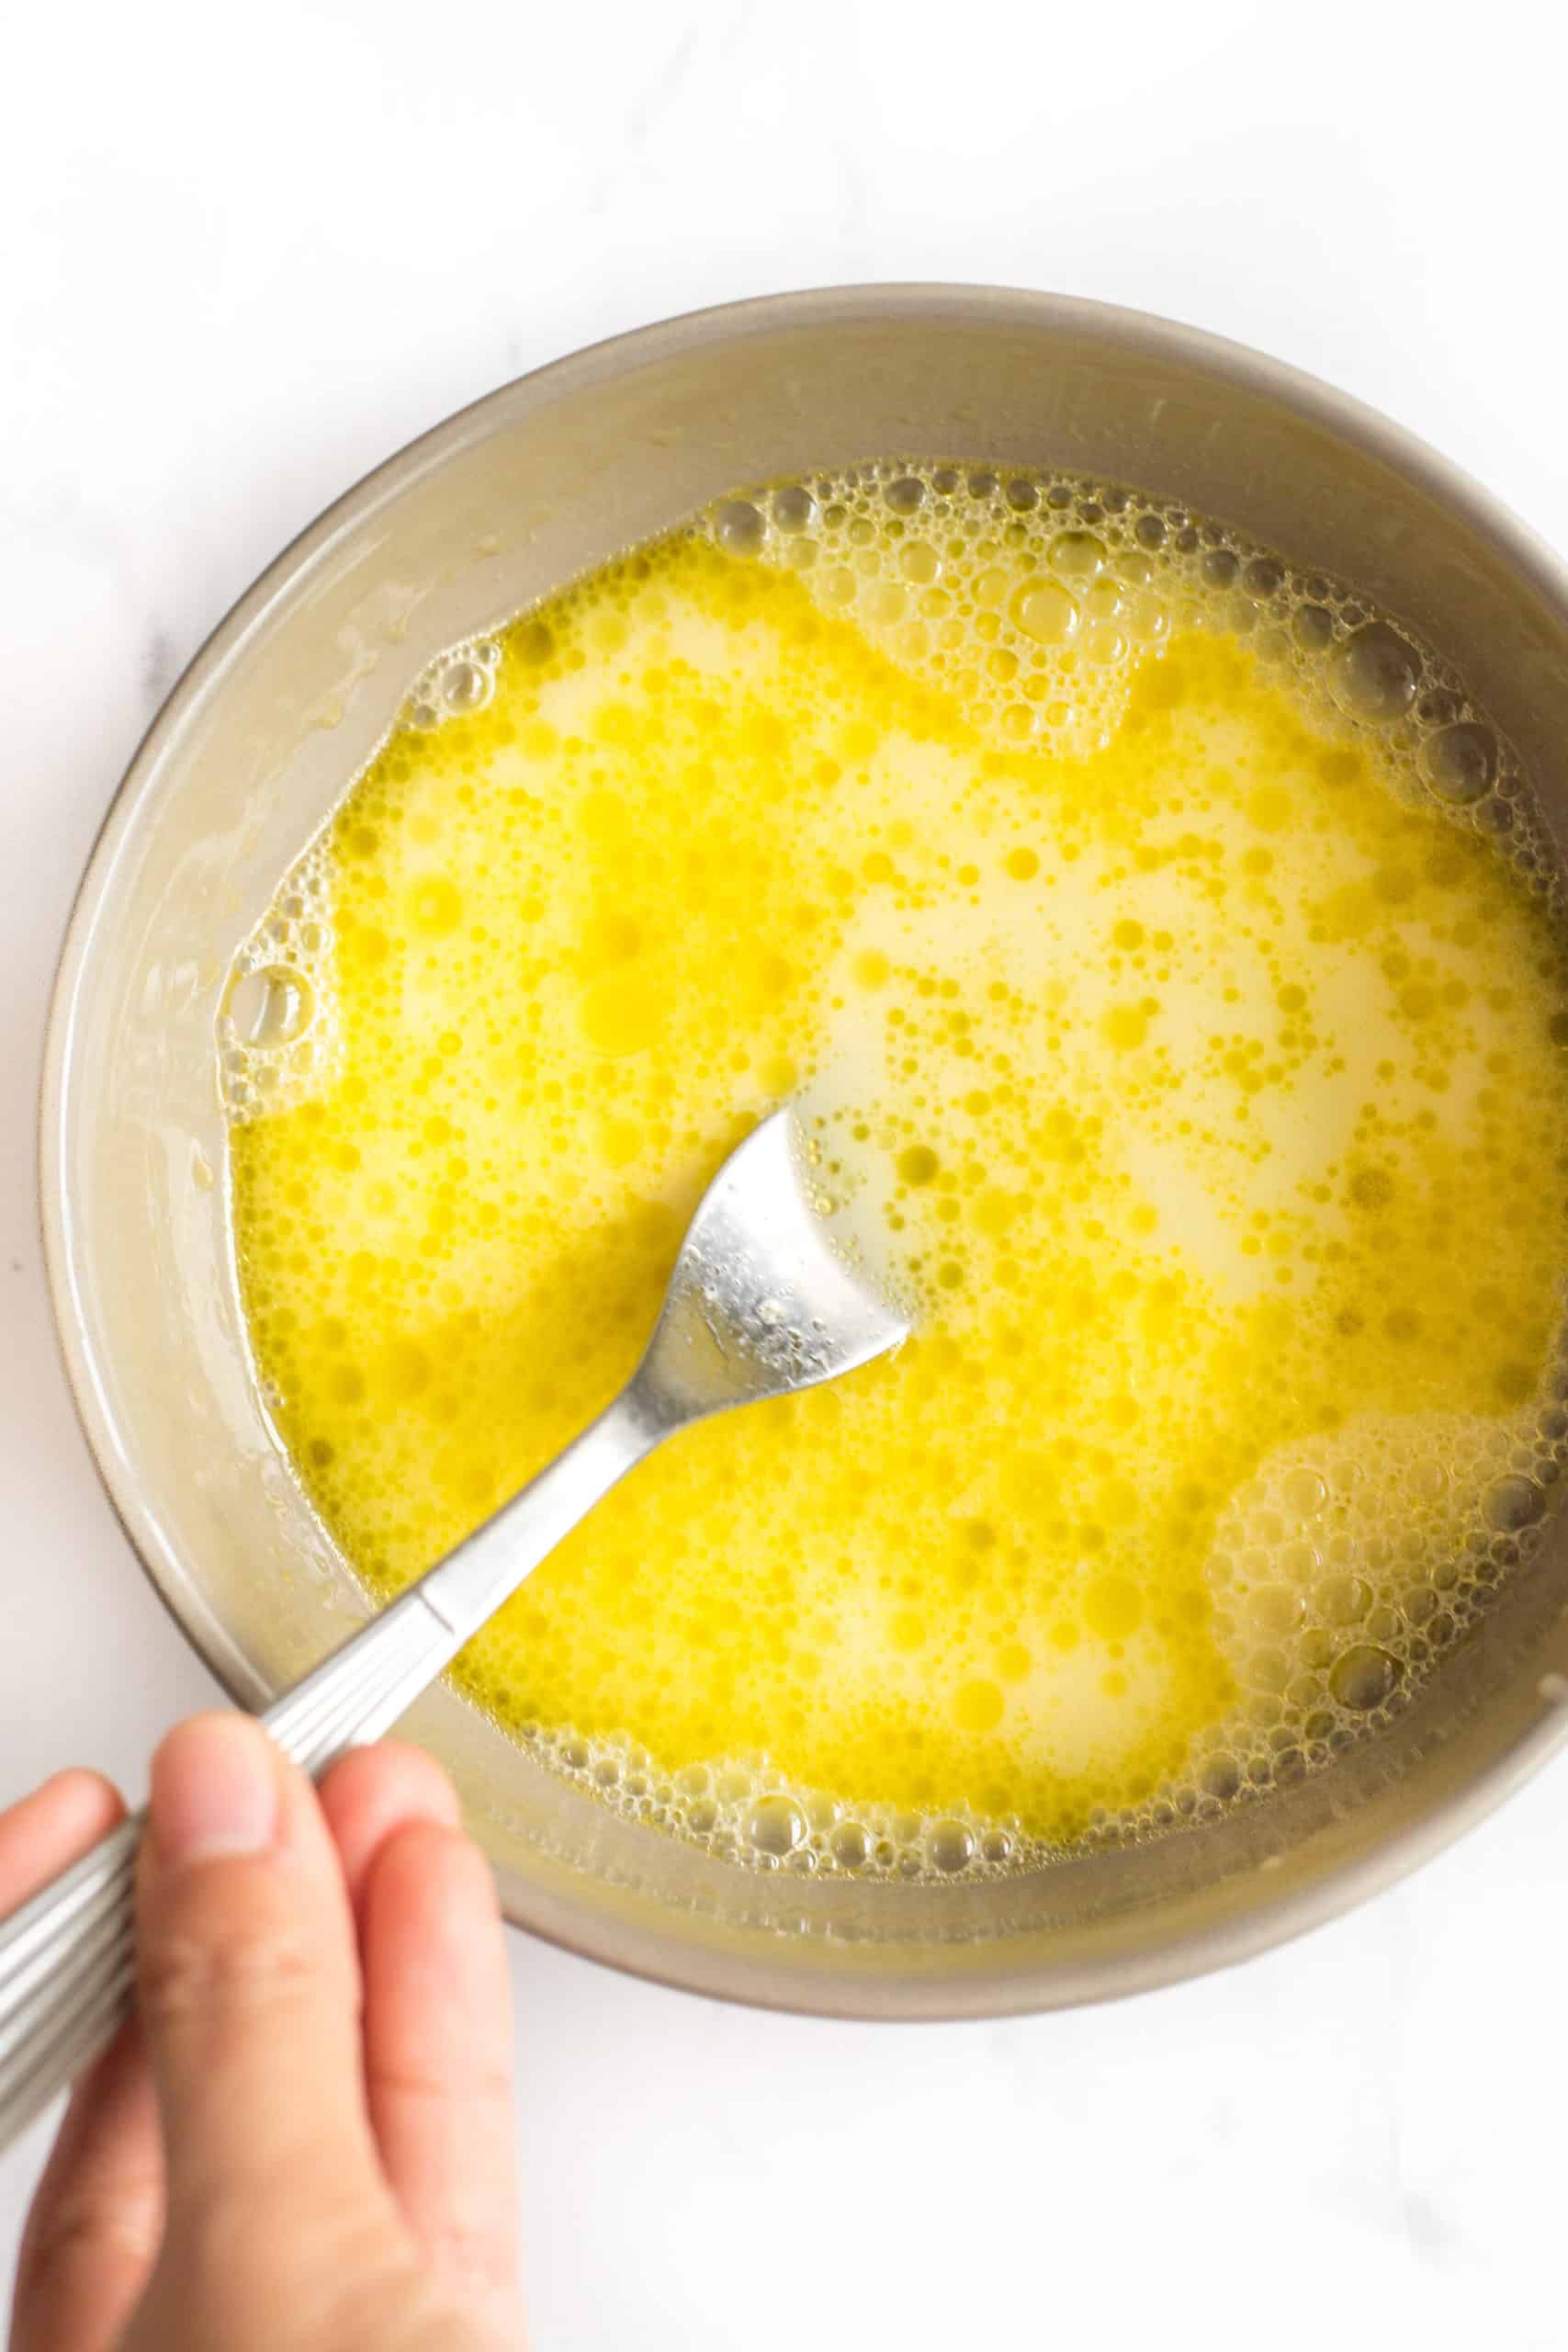 Beating eggs, olive oil, and water in a bowl.